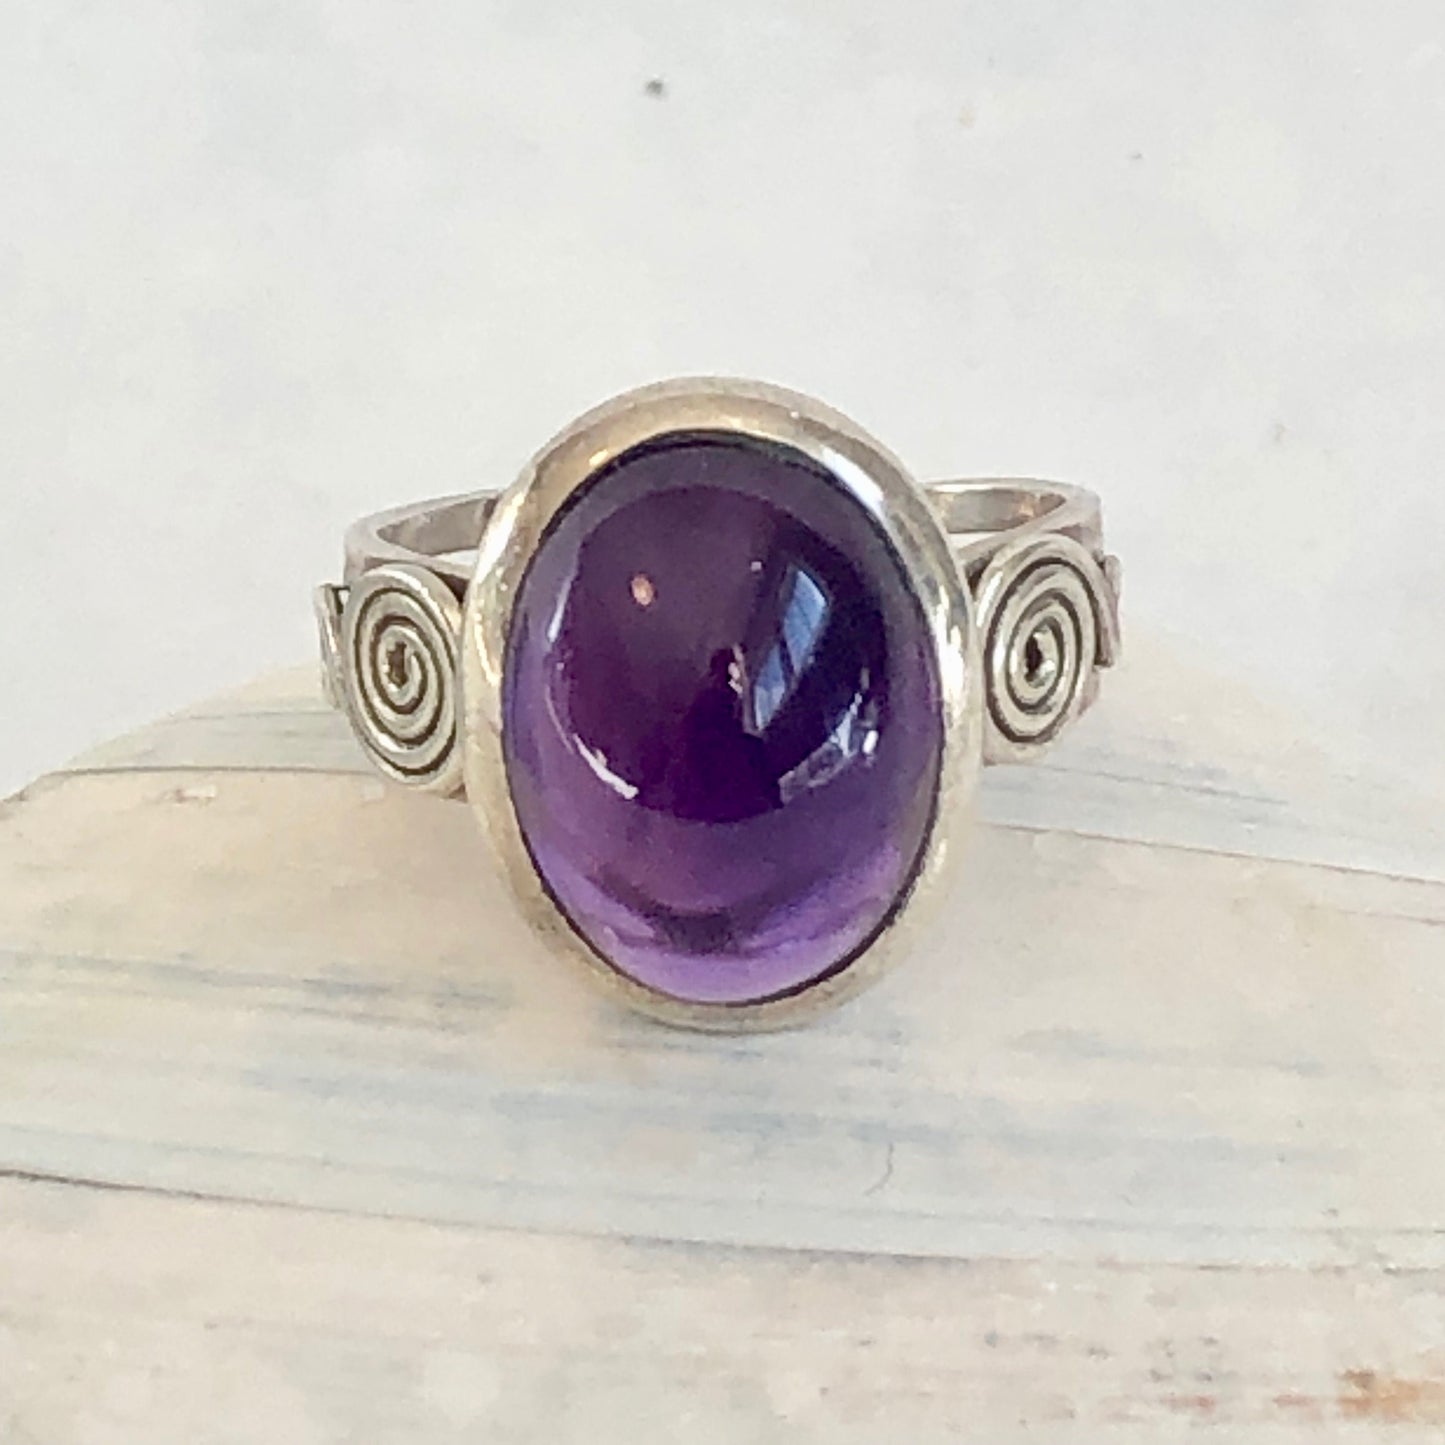 Amethyst and sterling silver oval ring, size 9 1/4.